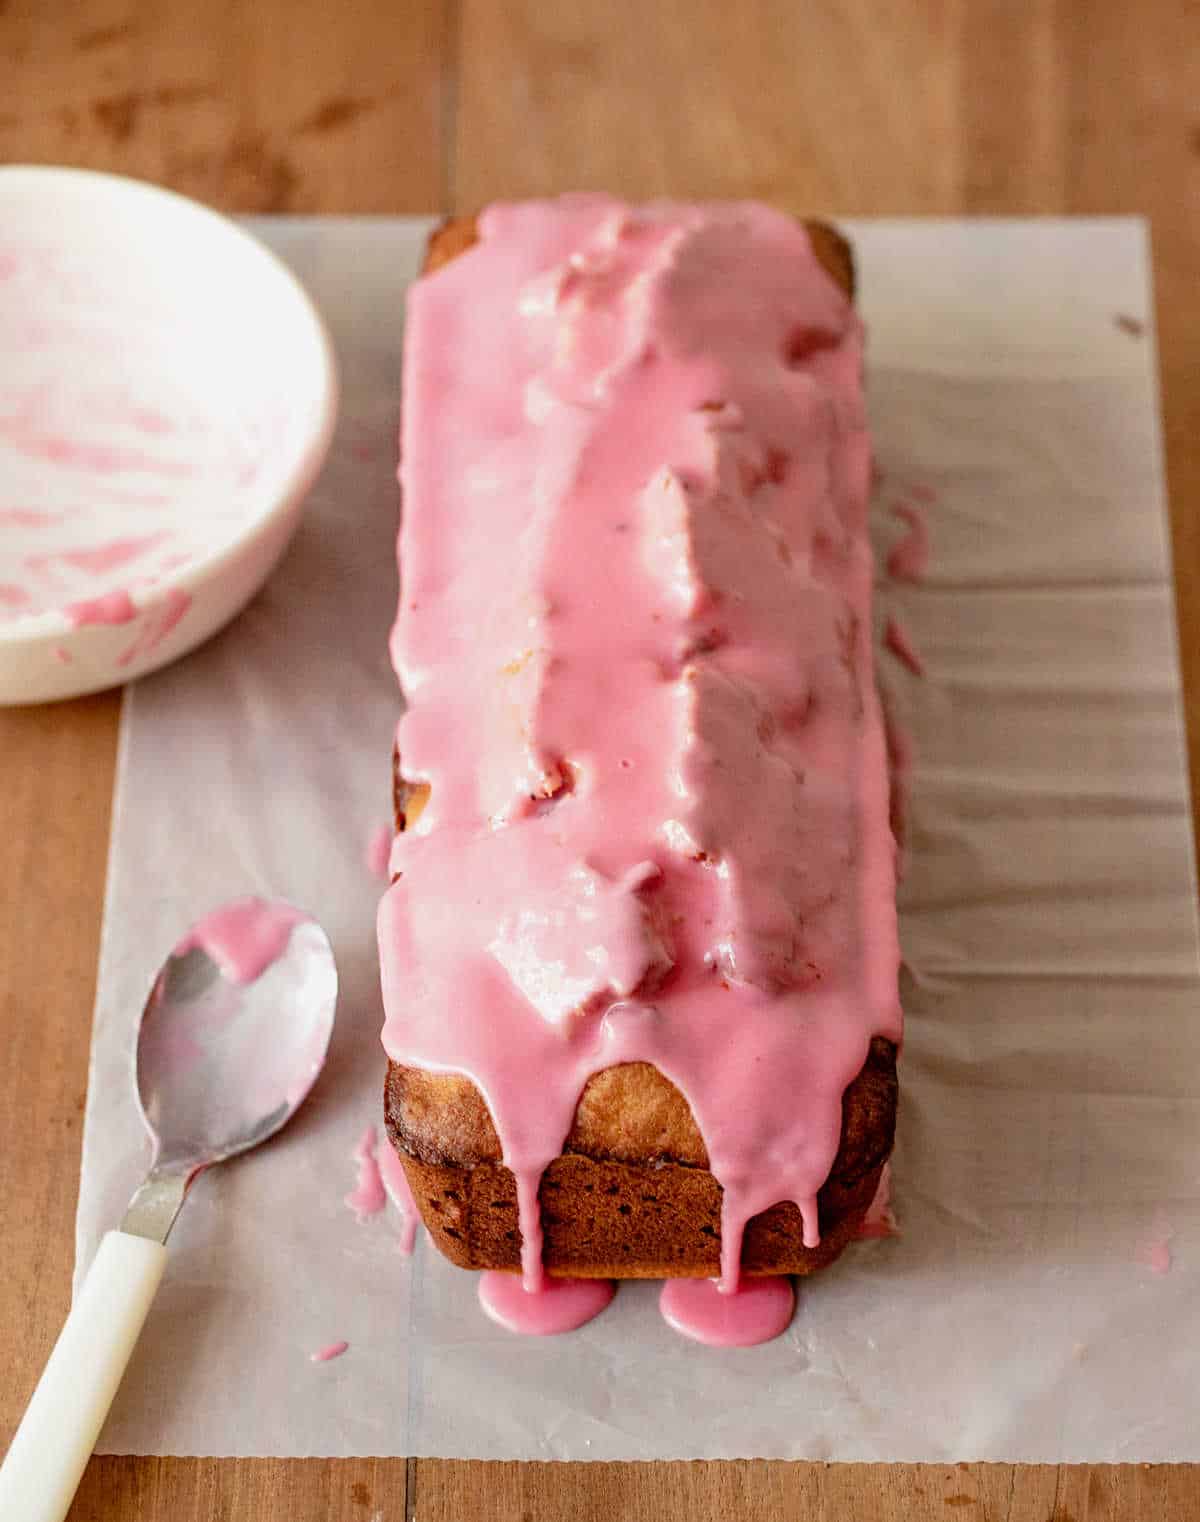 Pink glaze dripping from a loaf on a parchment paper on a wooden table; white bowl and spoon.